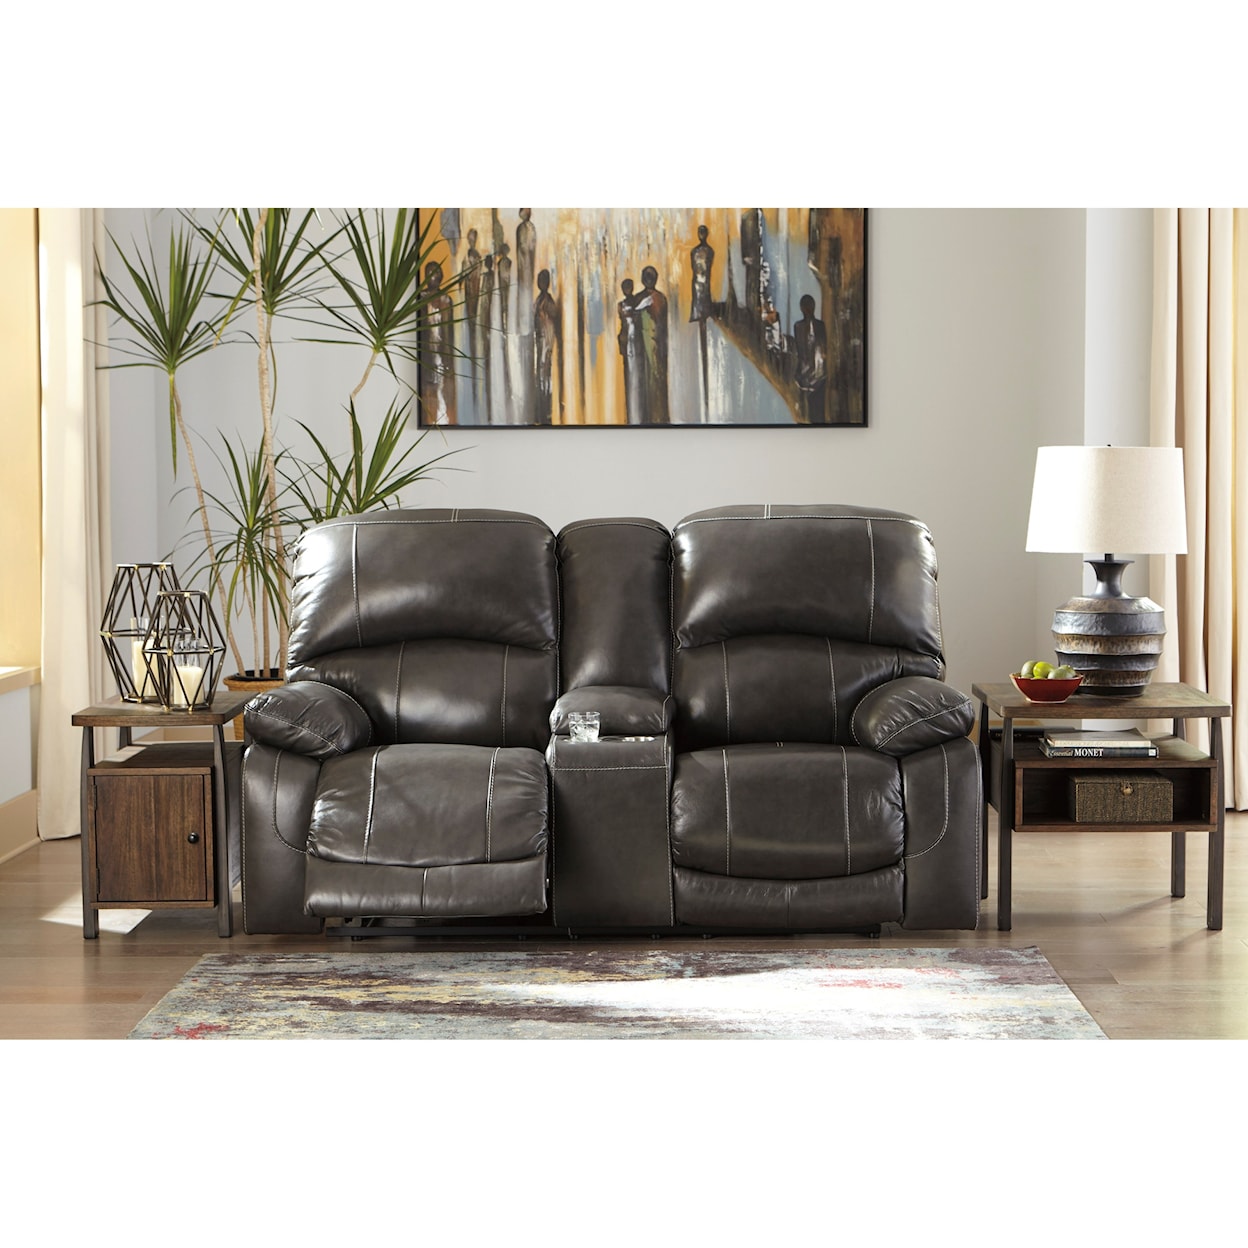 Signature Design by Ashley Furniture Hallstrung Pwr Rec Loveseat with Console & Adj Hdrsts